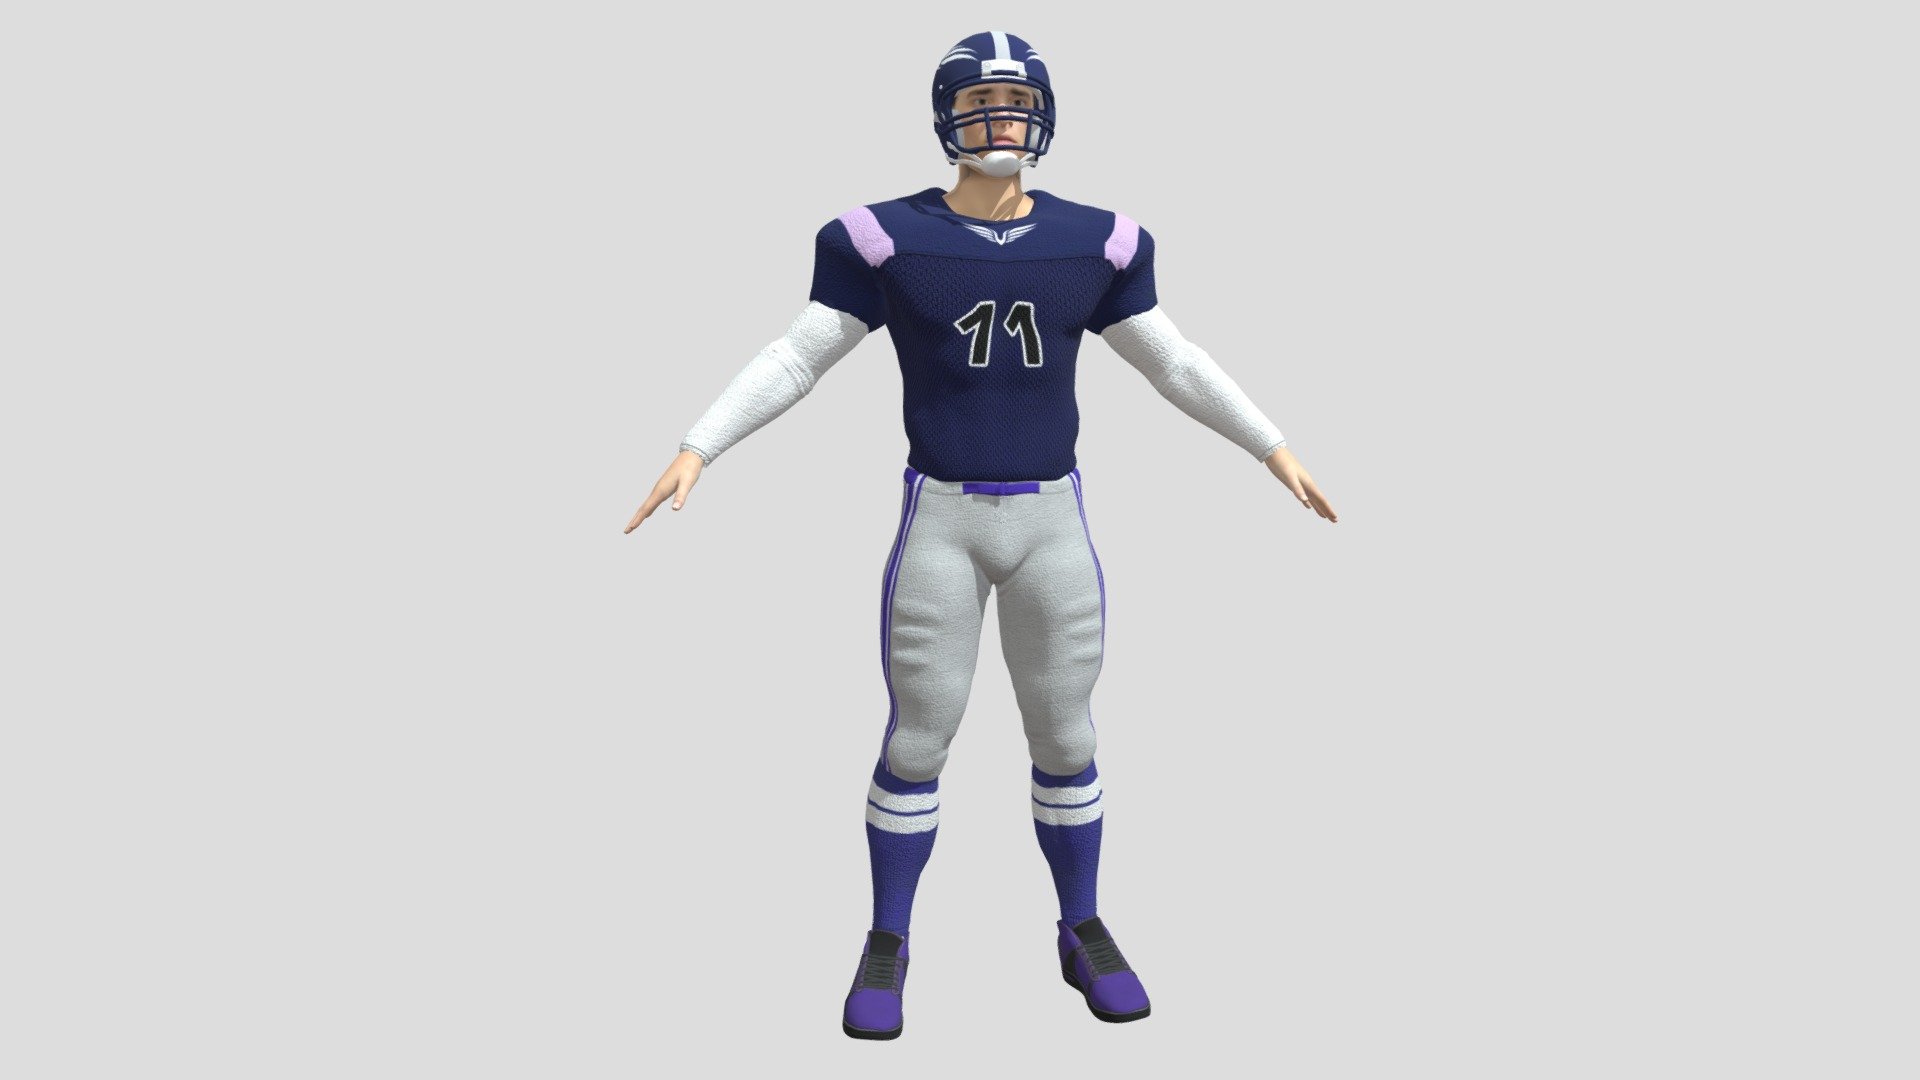 American Footballer 3D model is a high quality, photo real model that will enhance detail and realism to any of your game projects or commercials. The model has a fully textured, detailed design that allows for close-up renders.

• High quality polygonal model with detailed texture, correctly scaled for an accurate representation of the original object.
• Maya 2019 V-Ray and standard materials scenes
• No cleaning up necessary, just drop your models into the scene, Load the texture and start rendering.
• No special plugin needed to open scene 3d model